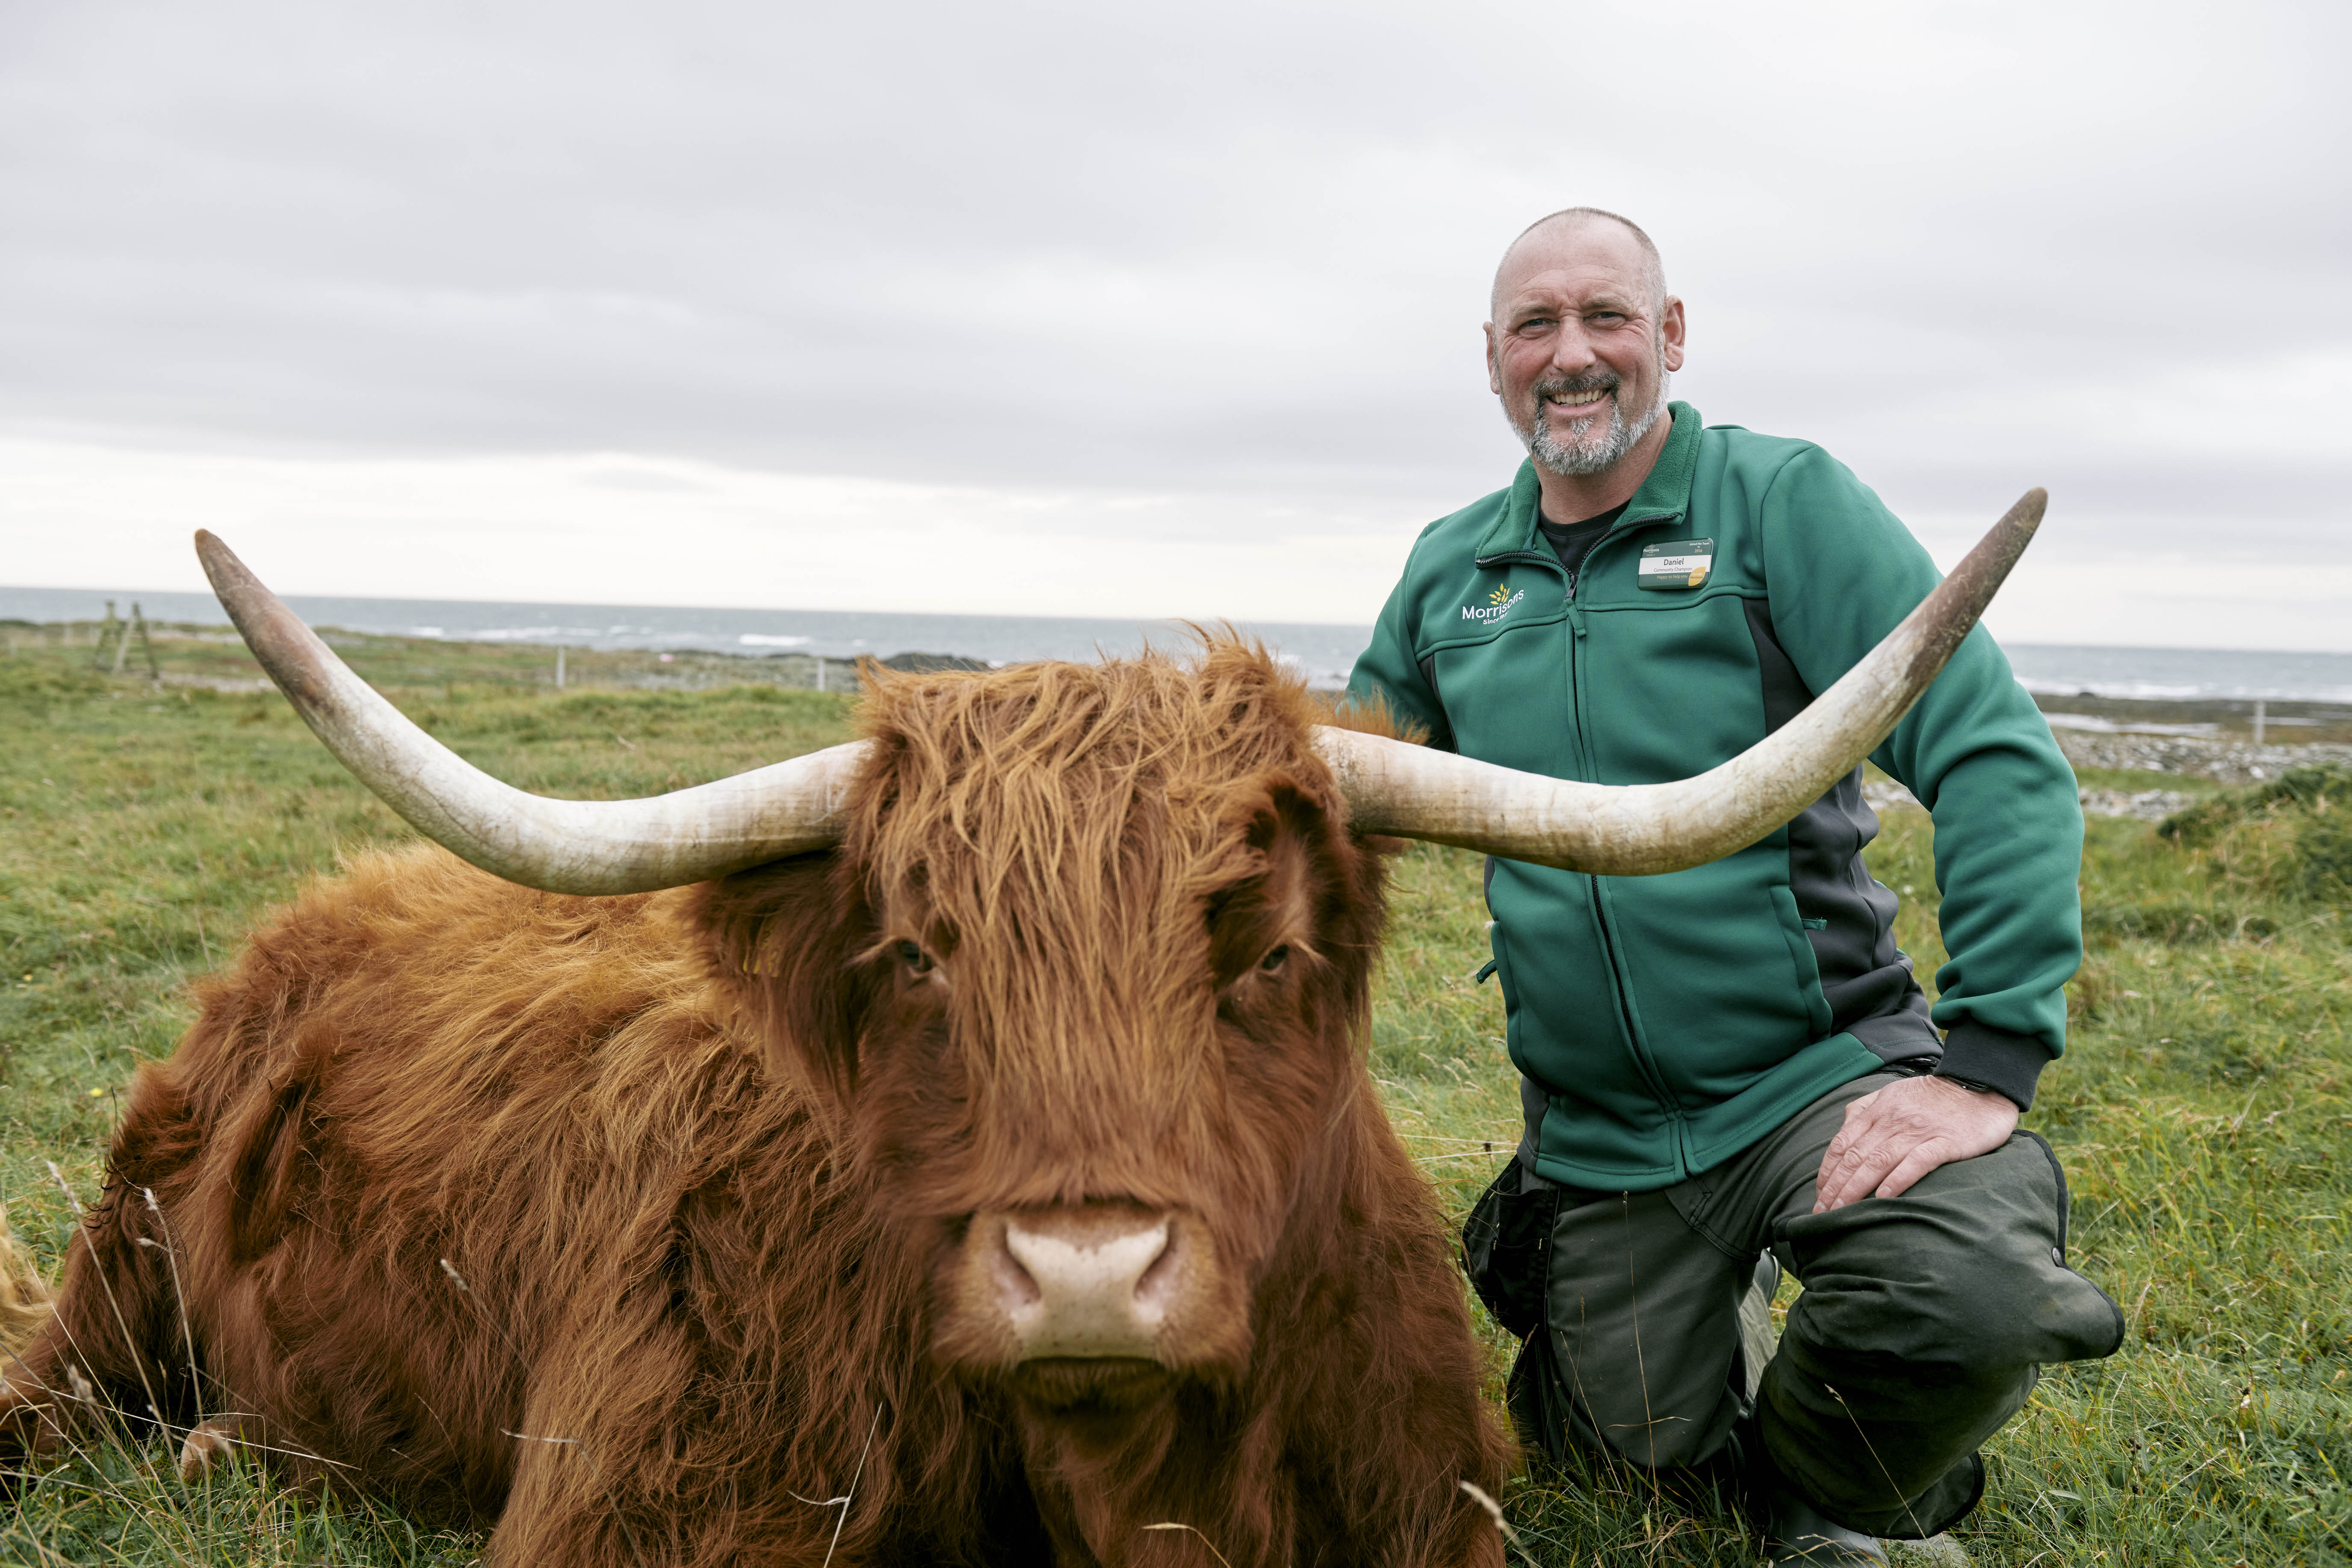 Morrisons trials seaweed animal feed for more climate-friendly cows